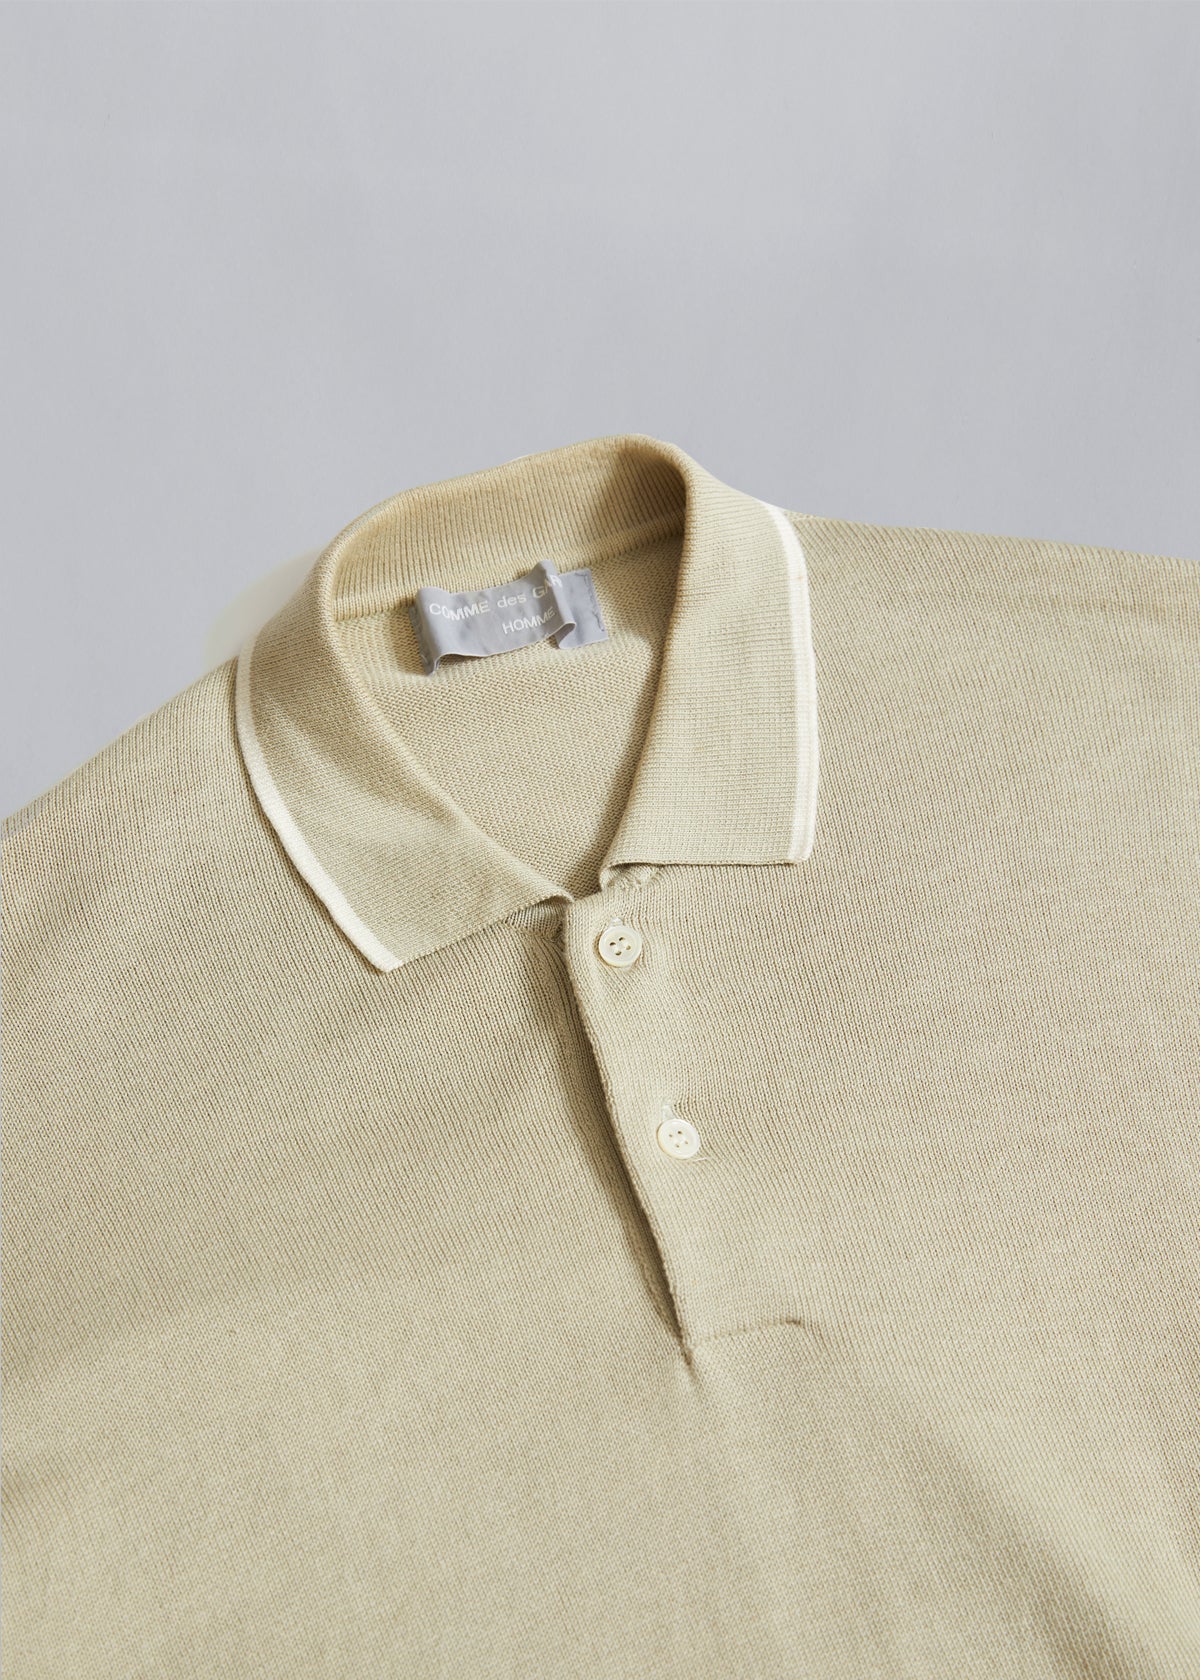 CDG Homme Natural Merino Wool Polo Knit 1980's - Large